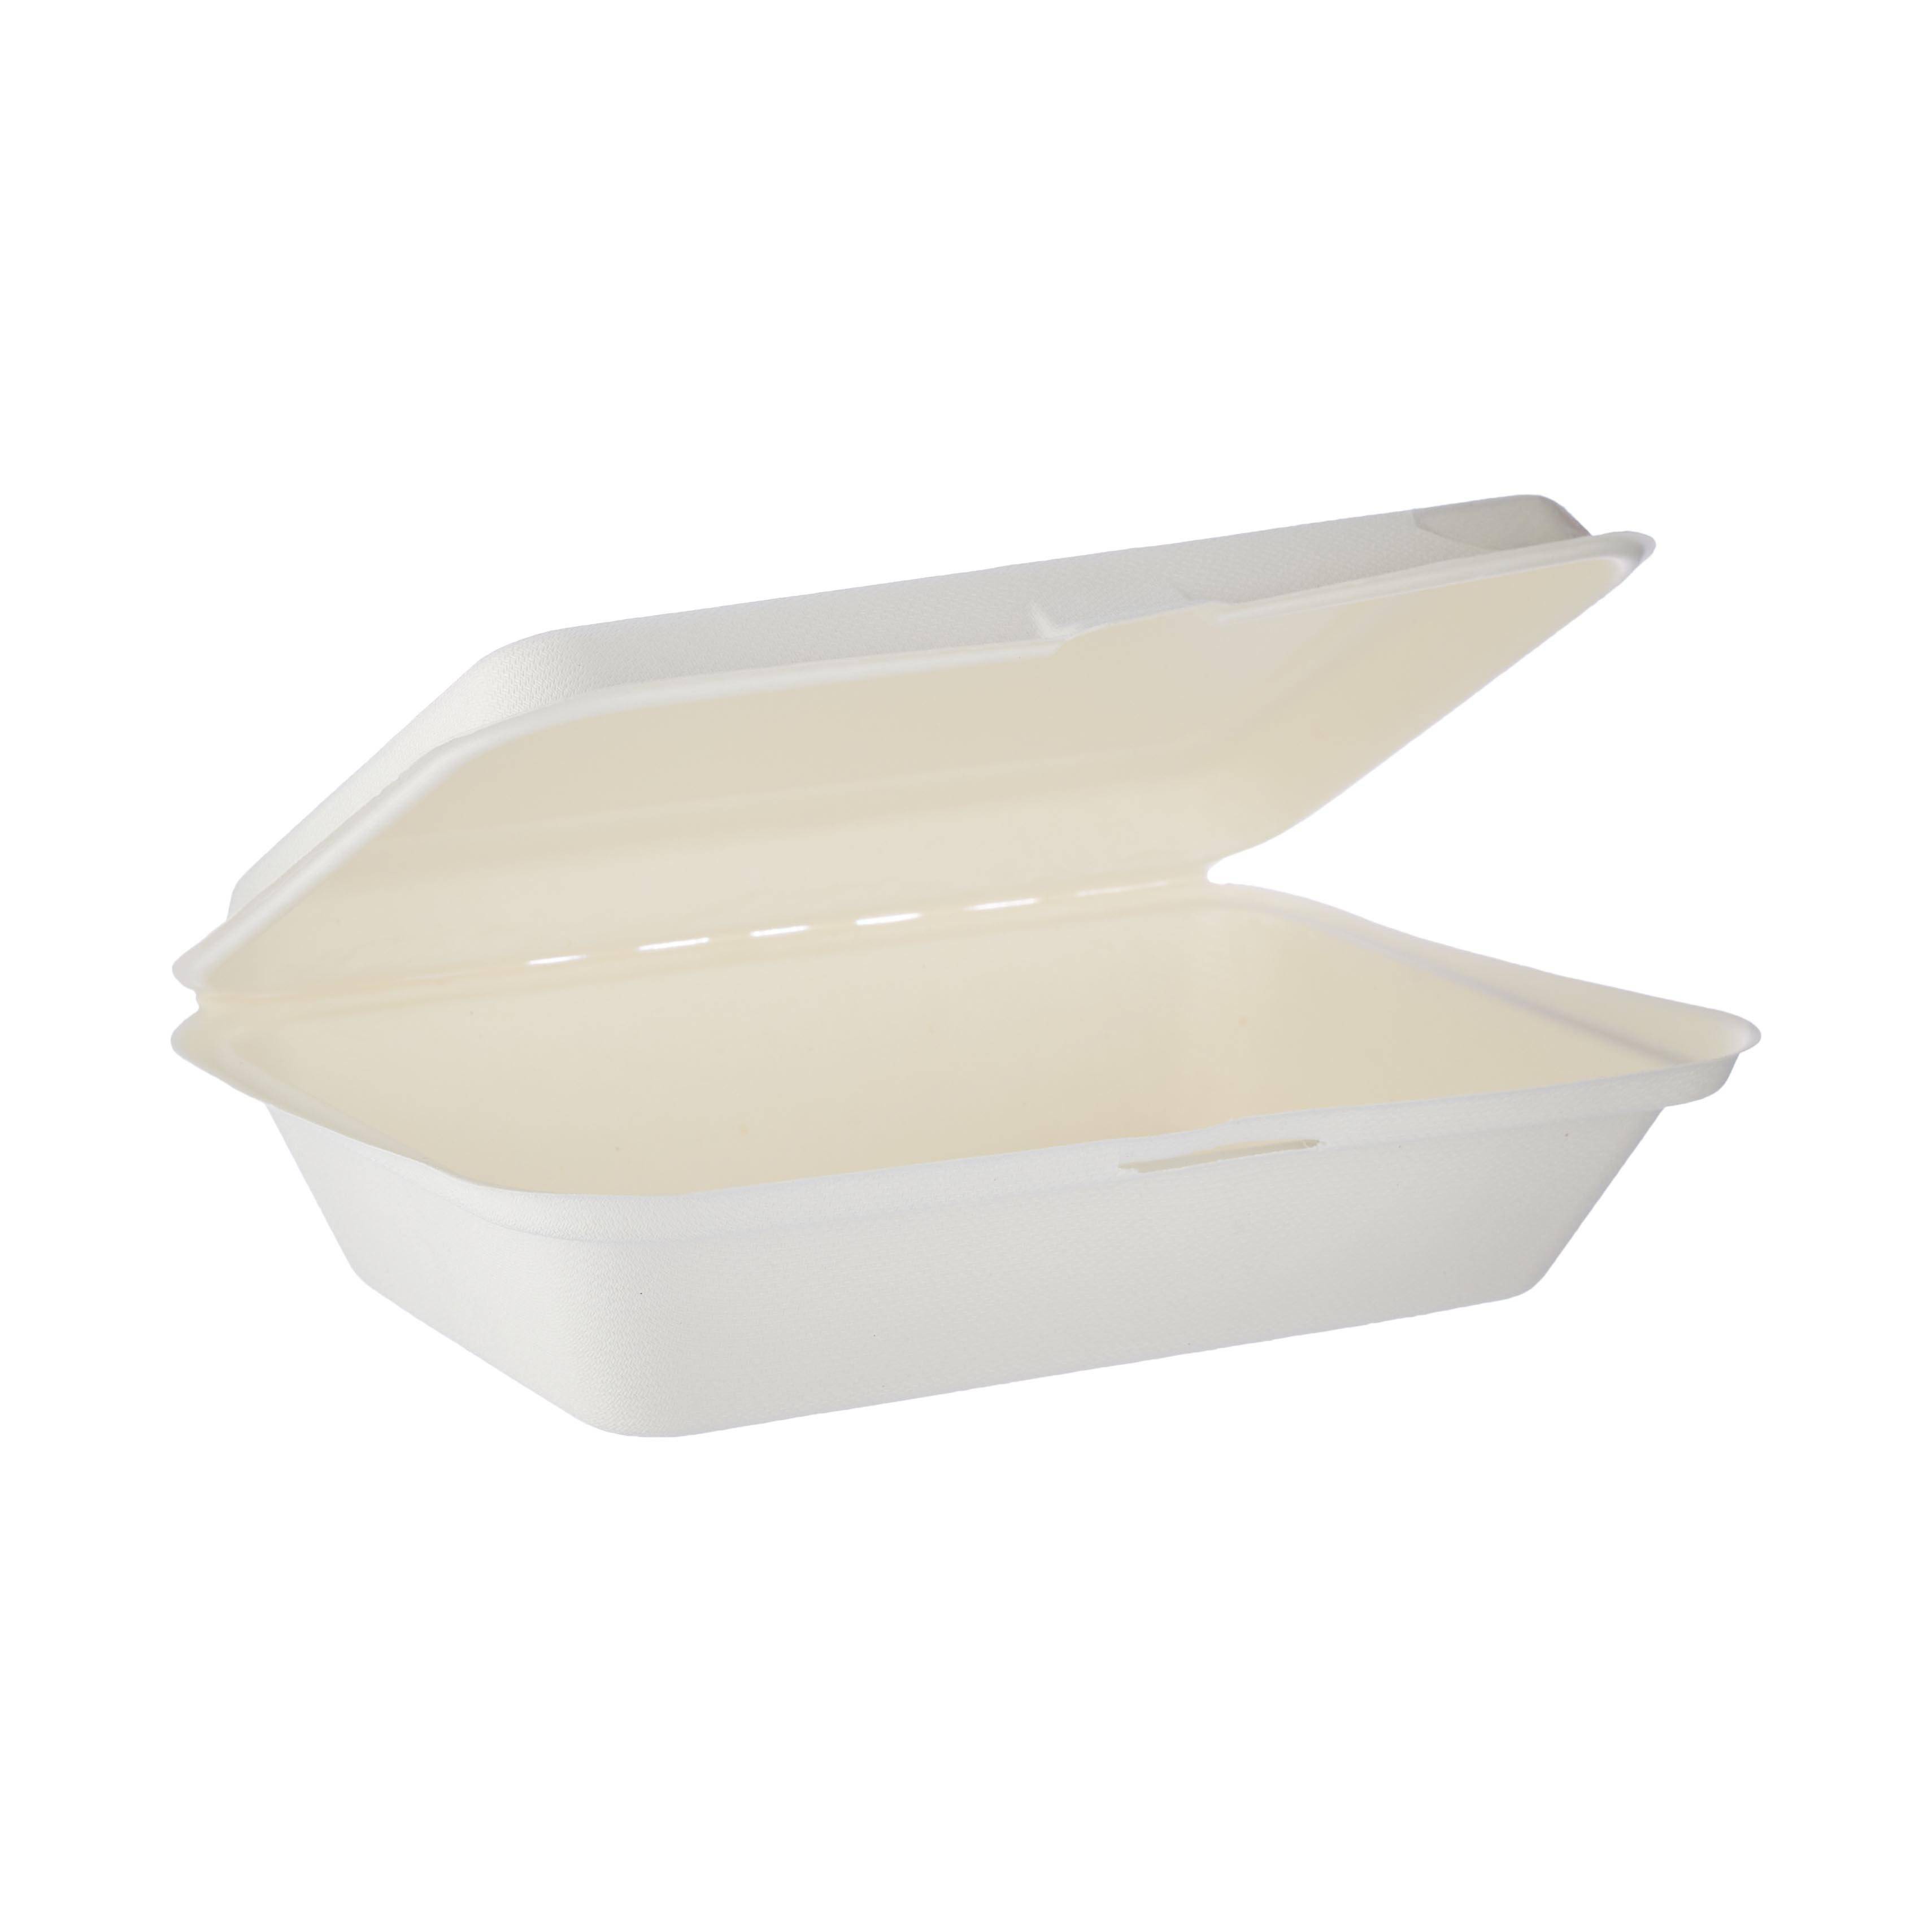 2 Compartment Clamshell Food Container - 9x6 Divided Hinged To Go Box